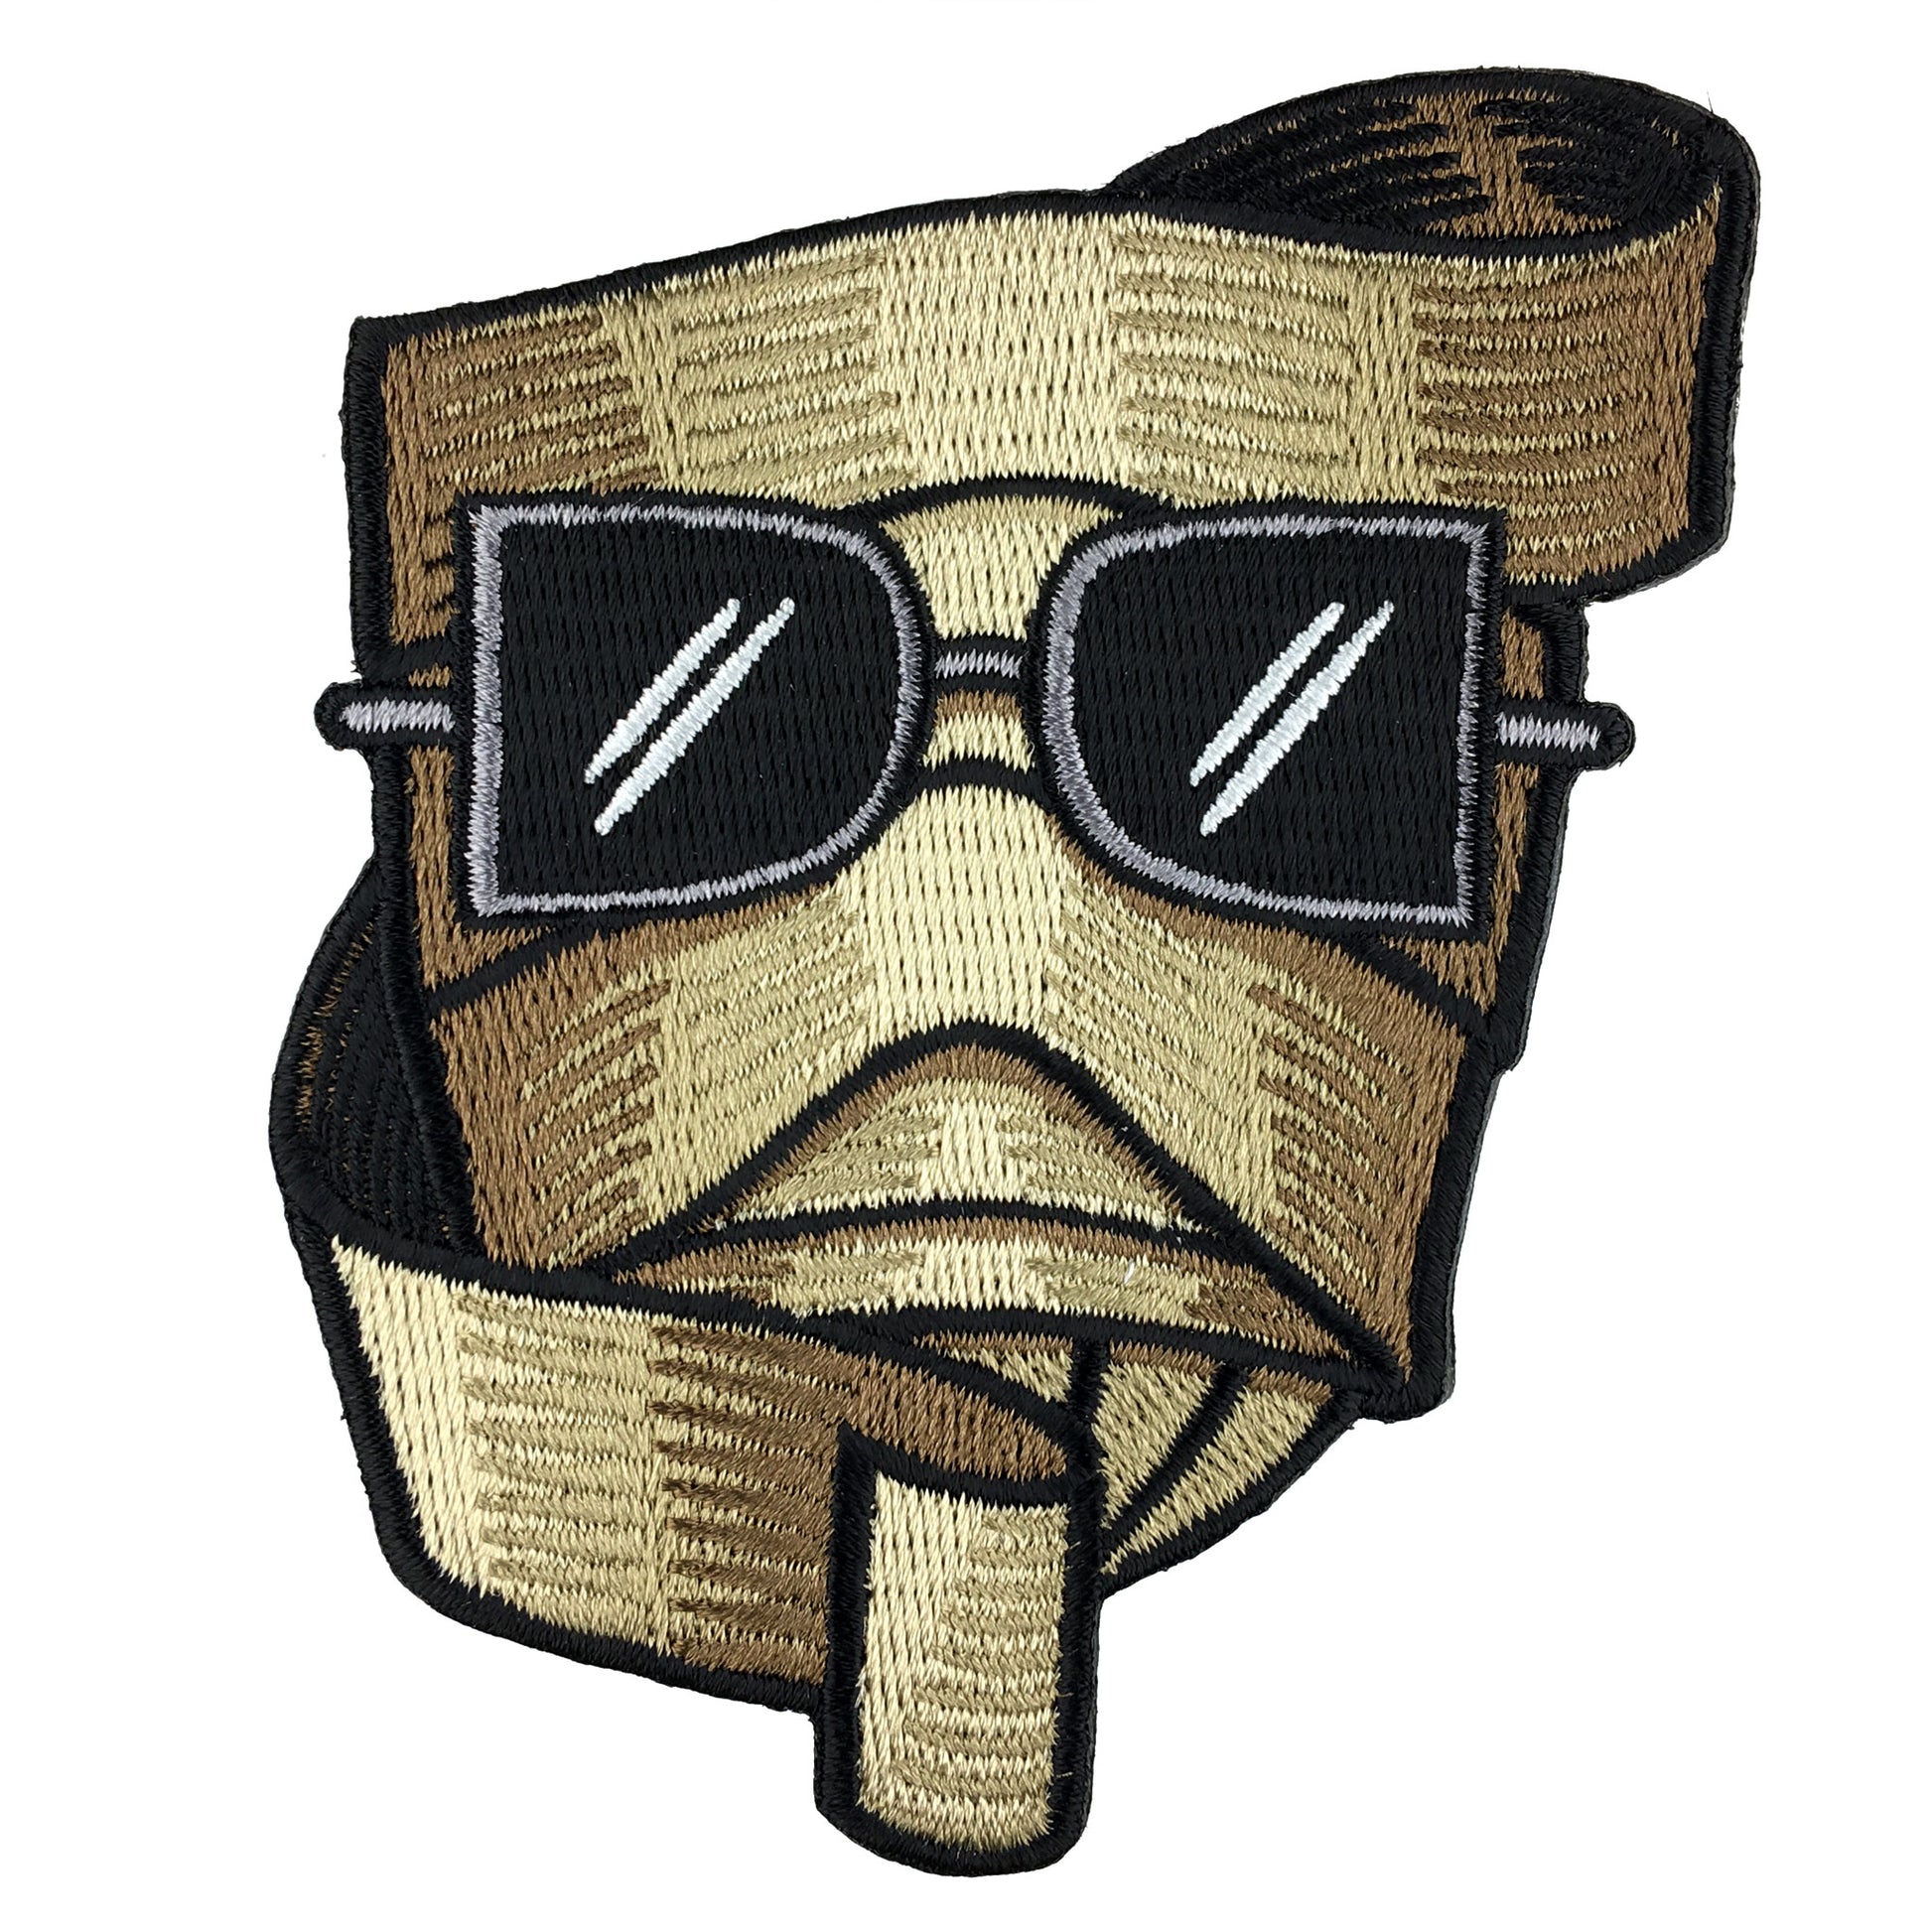 Invisible Man horror monster head embroidered patch by Monsterologist